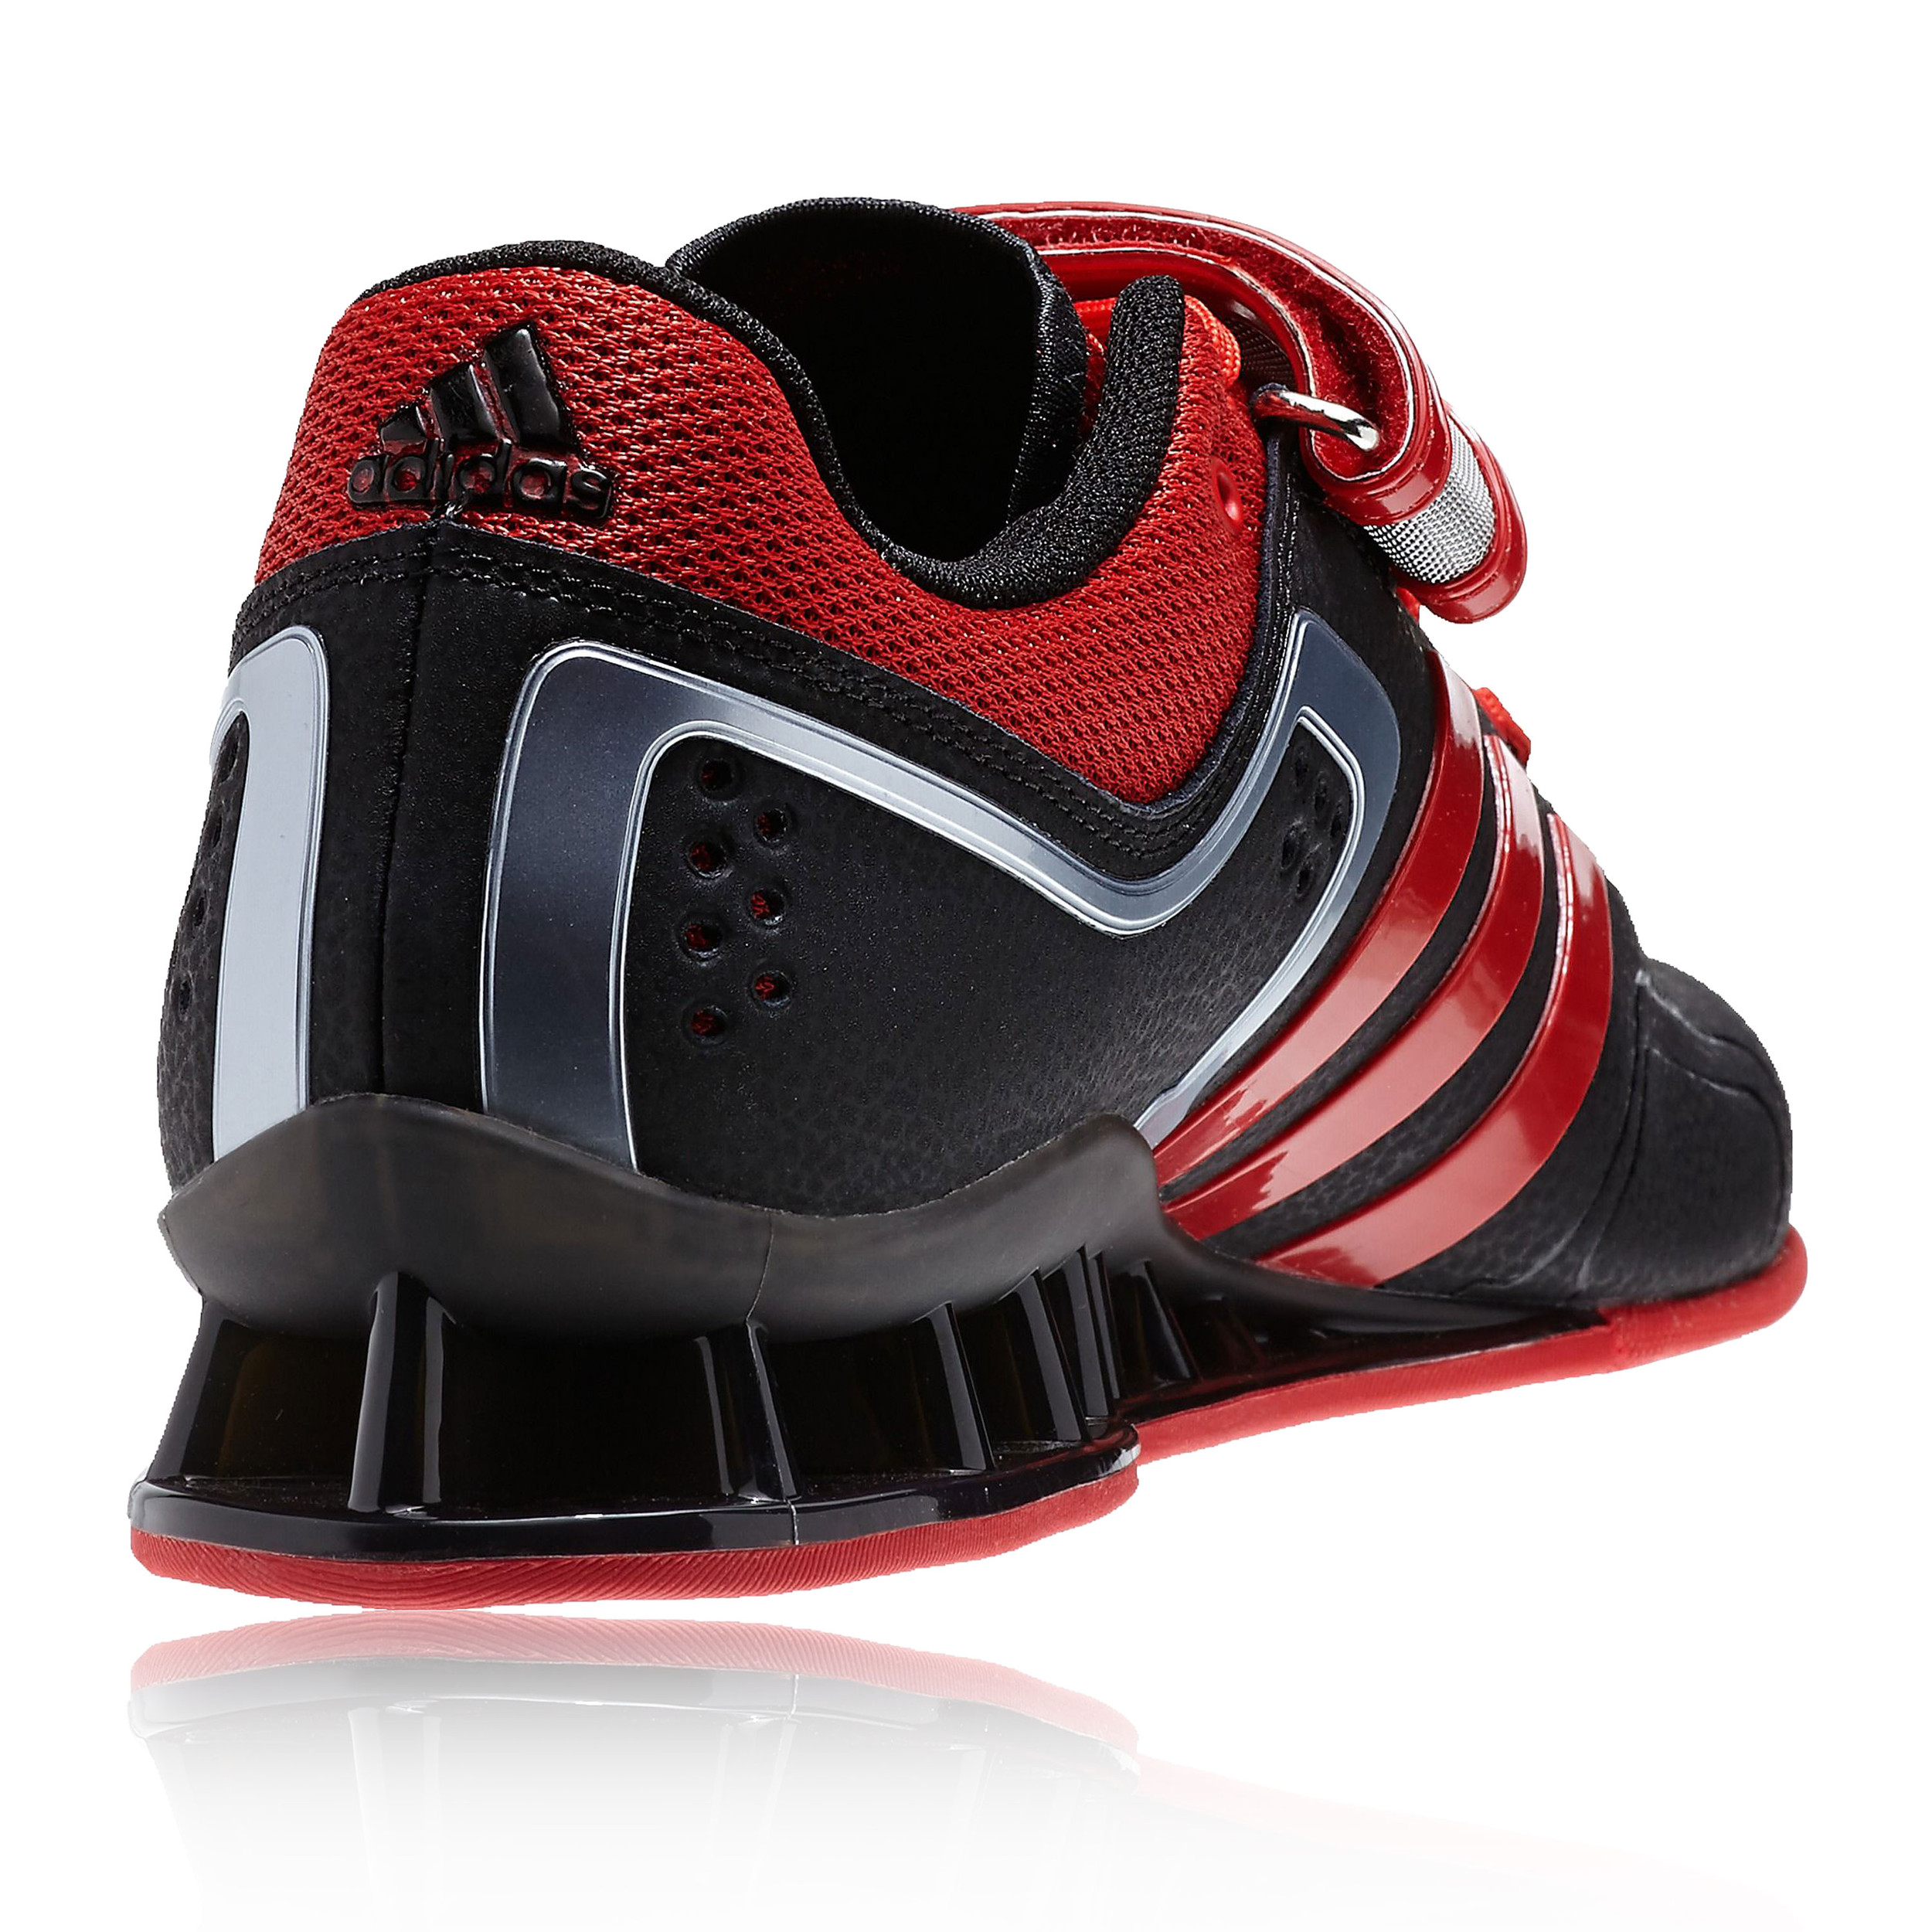 Adidas Adipower Mens Red Black Sneakers Gym Weightlifting Sports Shoes